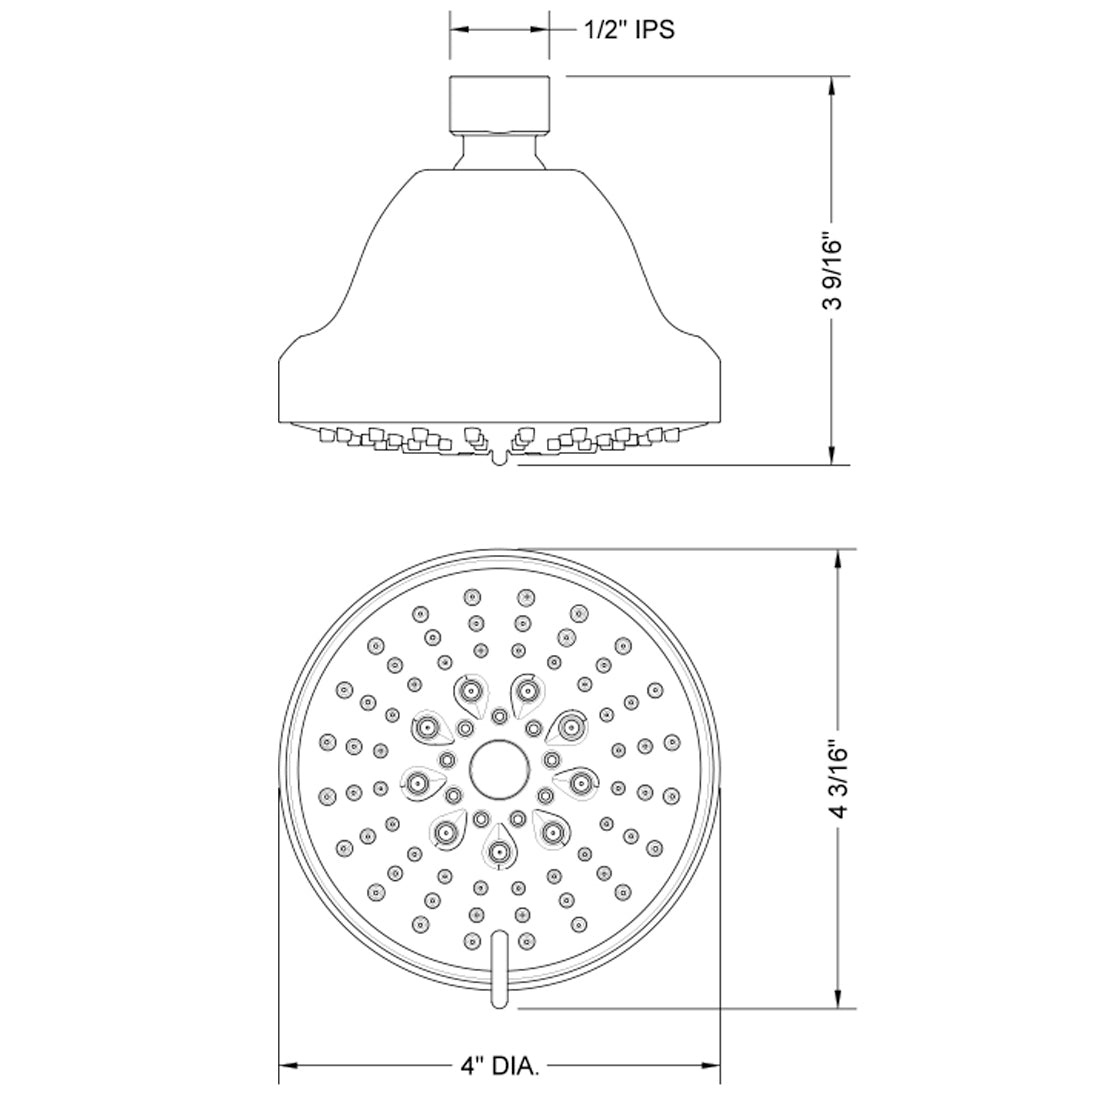 S165-2.0-SN - Showerall 6 Function Showerhead with JX7 Technology - Satin Nickel